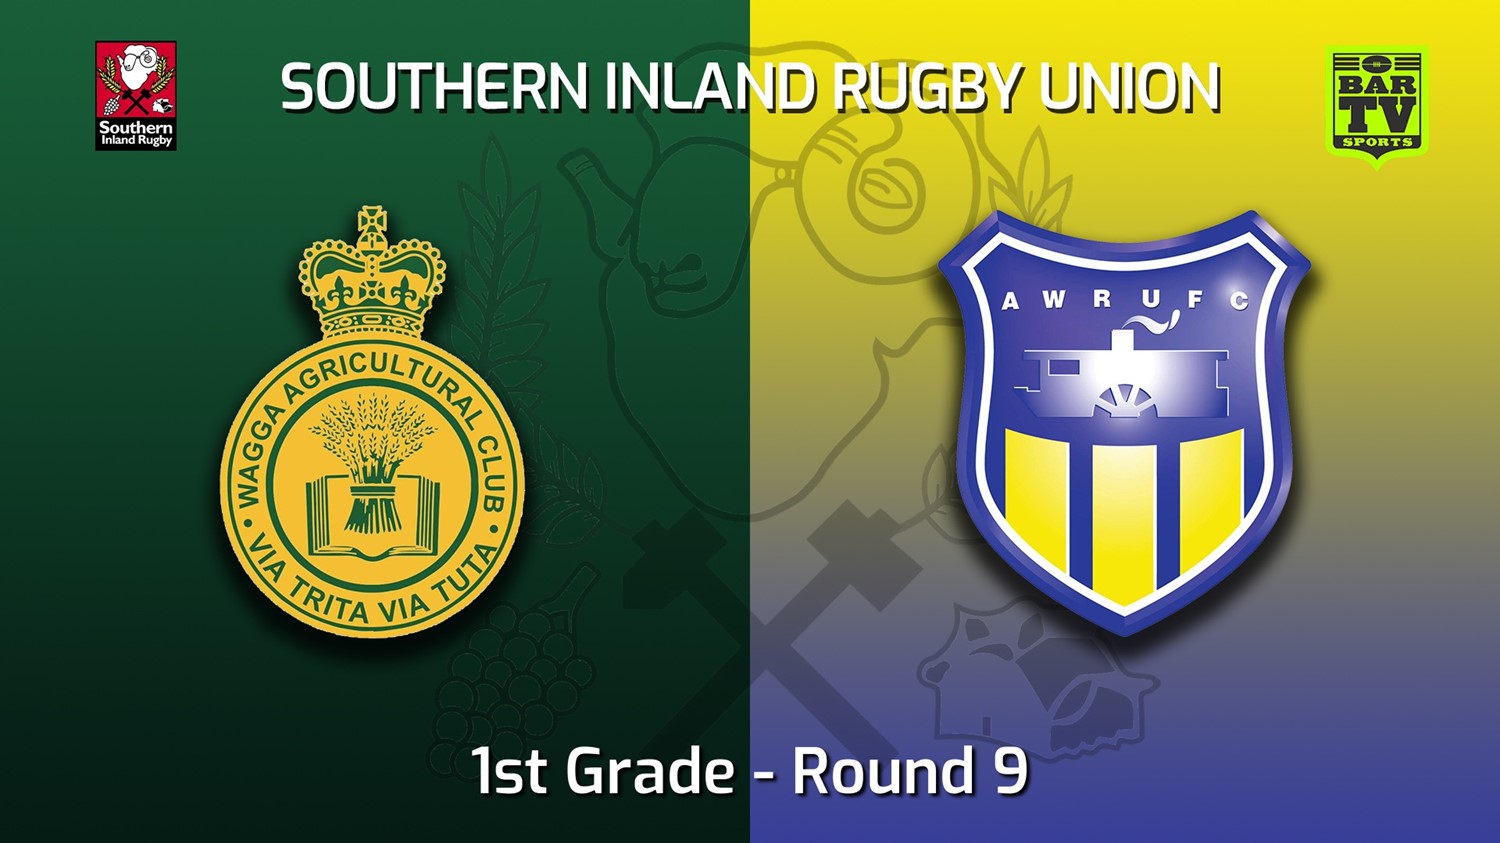 220604-Southern Inland Rugby Union Round 9 - 1st Grade - Wagga Agricultural College v Albury Steamers Slate Image